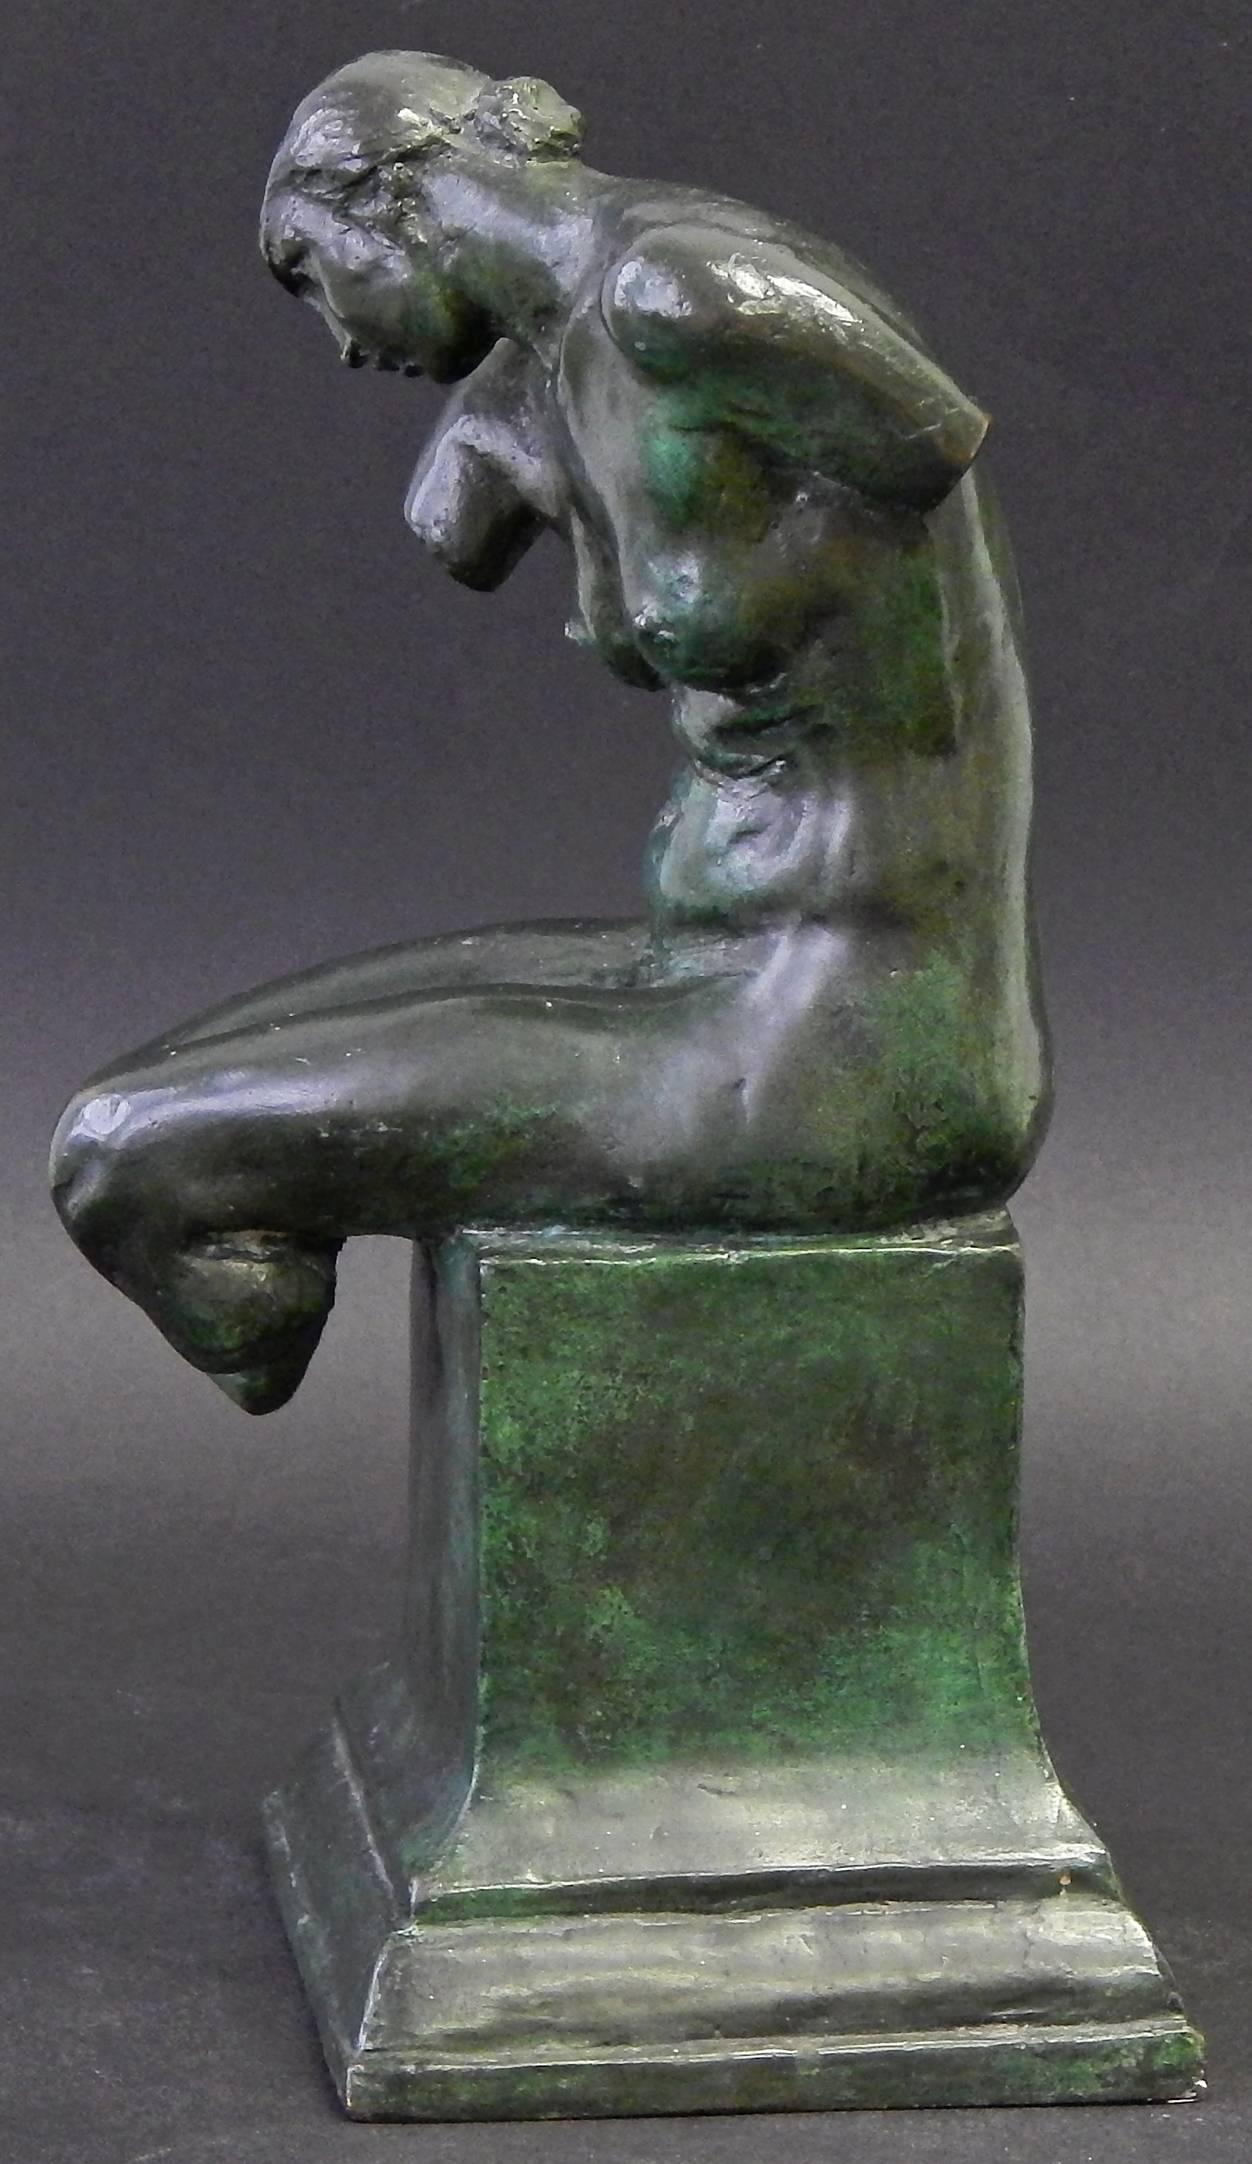 Finished with a gorgeous, deep green-black patina with mossy highlights, this rare pair of bronze bookends depicting seated female nudes was sculpted by Max Kalish, best known for his series of sculptures celebrating the American worker. By